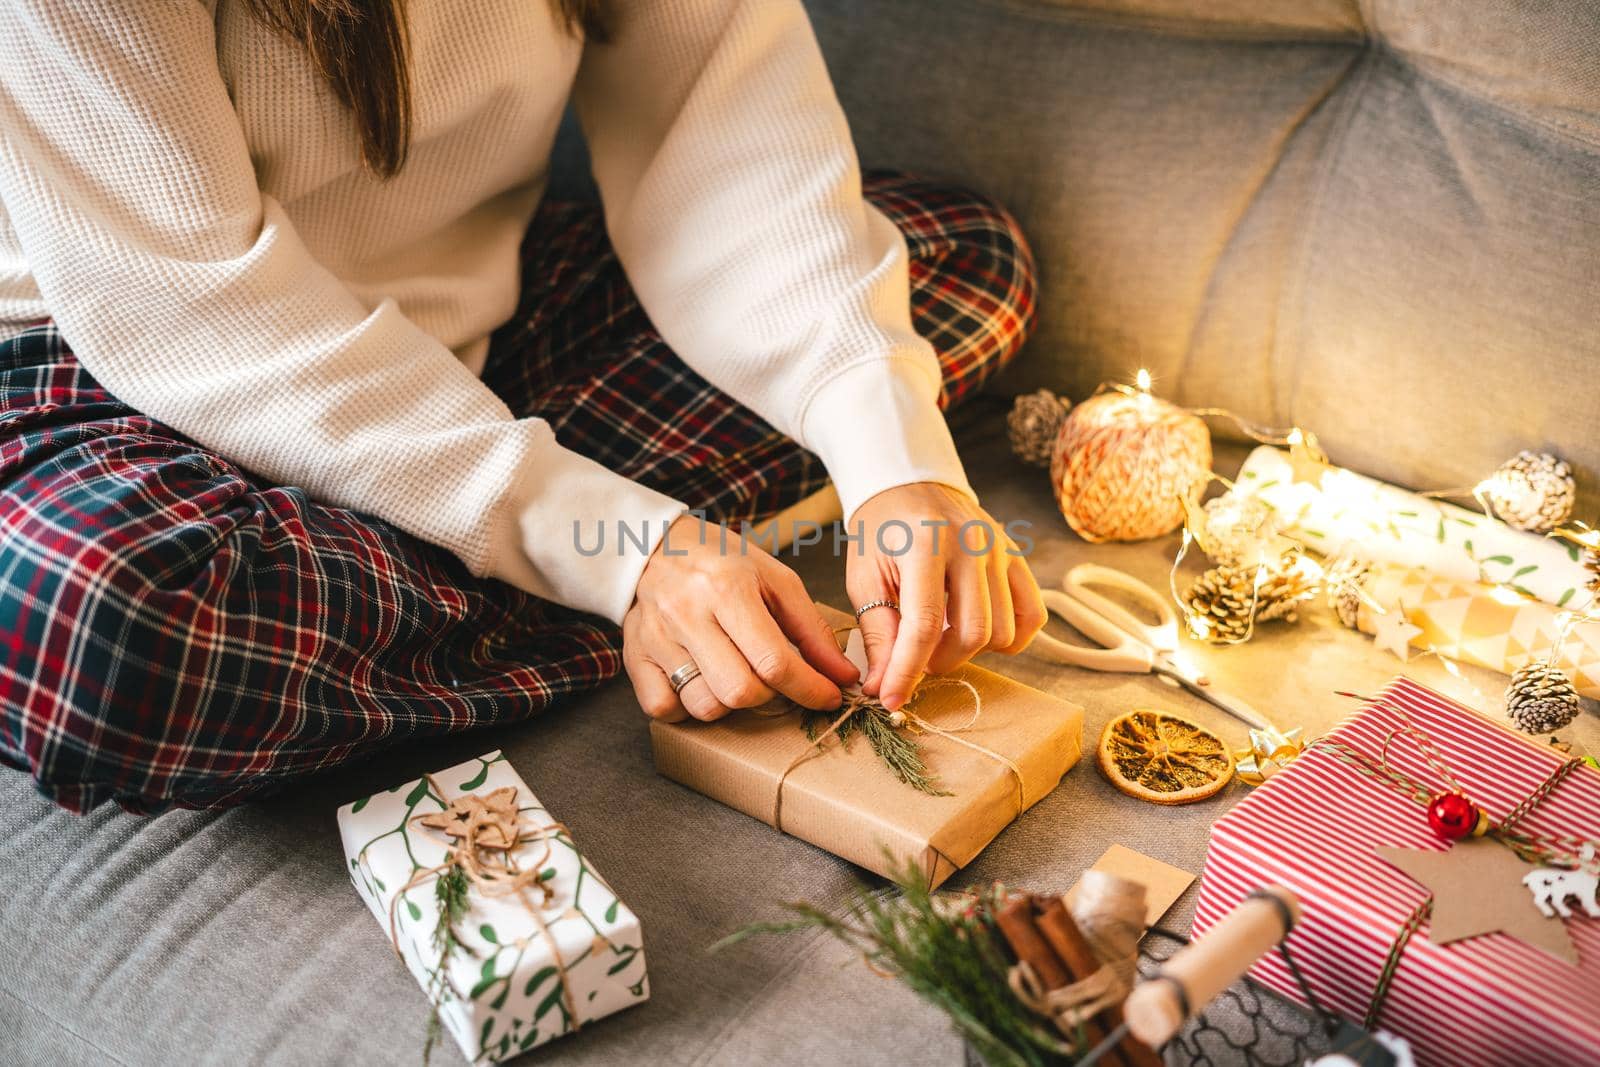 Woman s hands wrapping Christmas gift boxes, close up. Cropped female sit and preparing natural eco presents on couch with decor elements and items. Merry Christmas or New year DIY packing Concept.